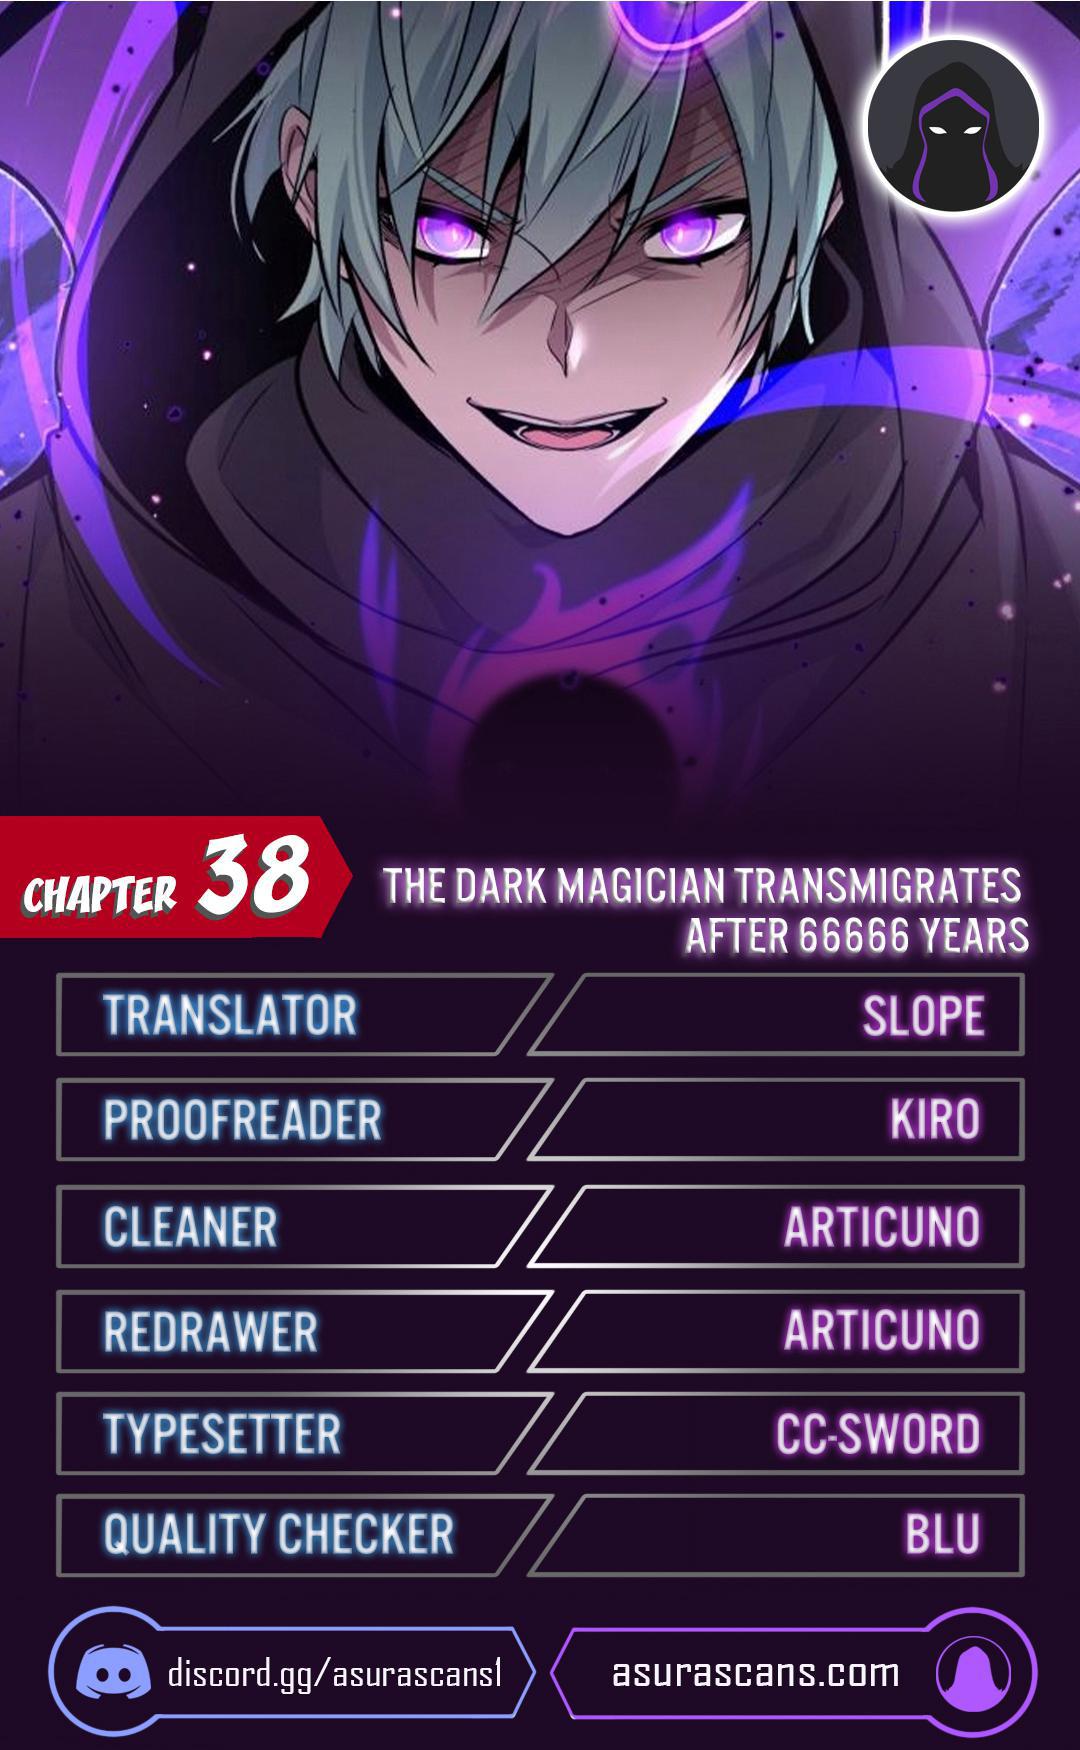 The Dark Magician Transmigrates After 66666 Years chapter 38